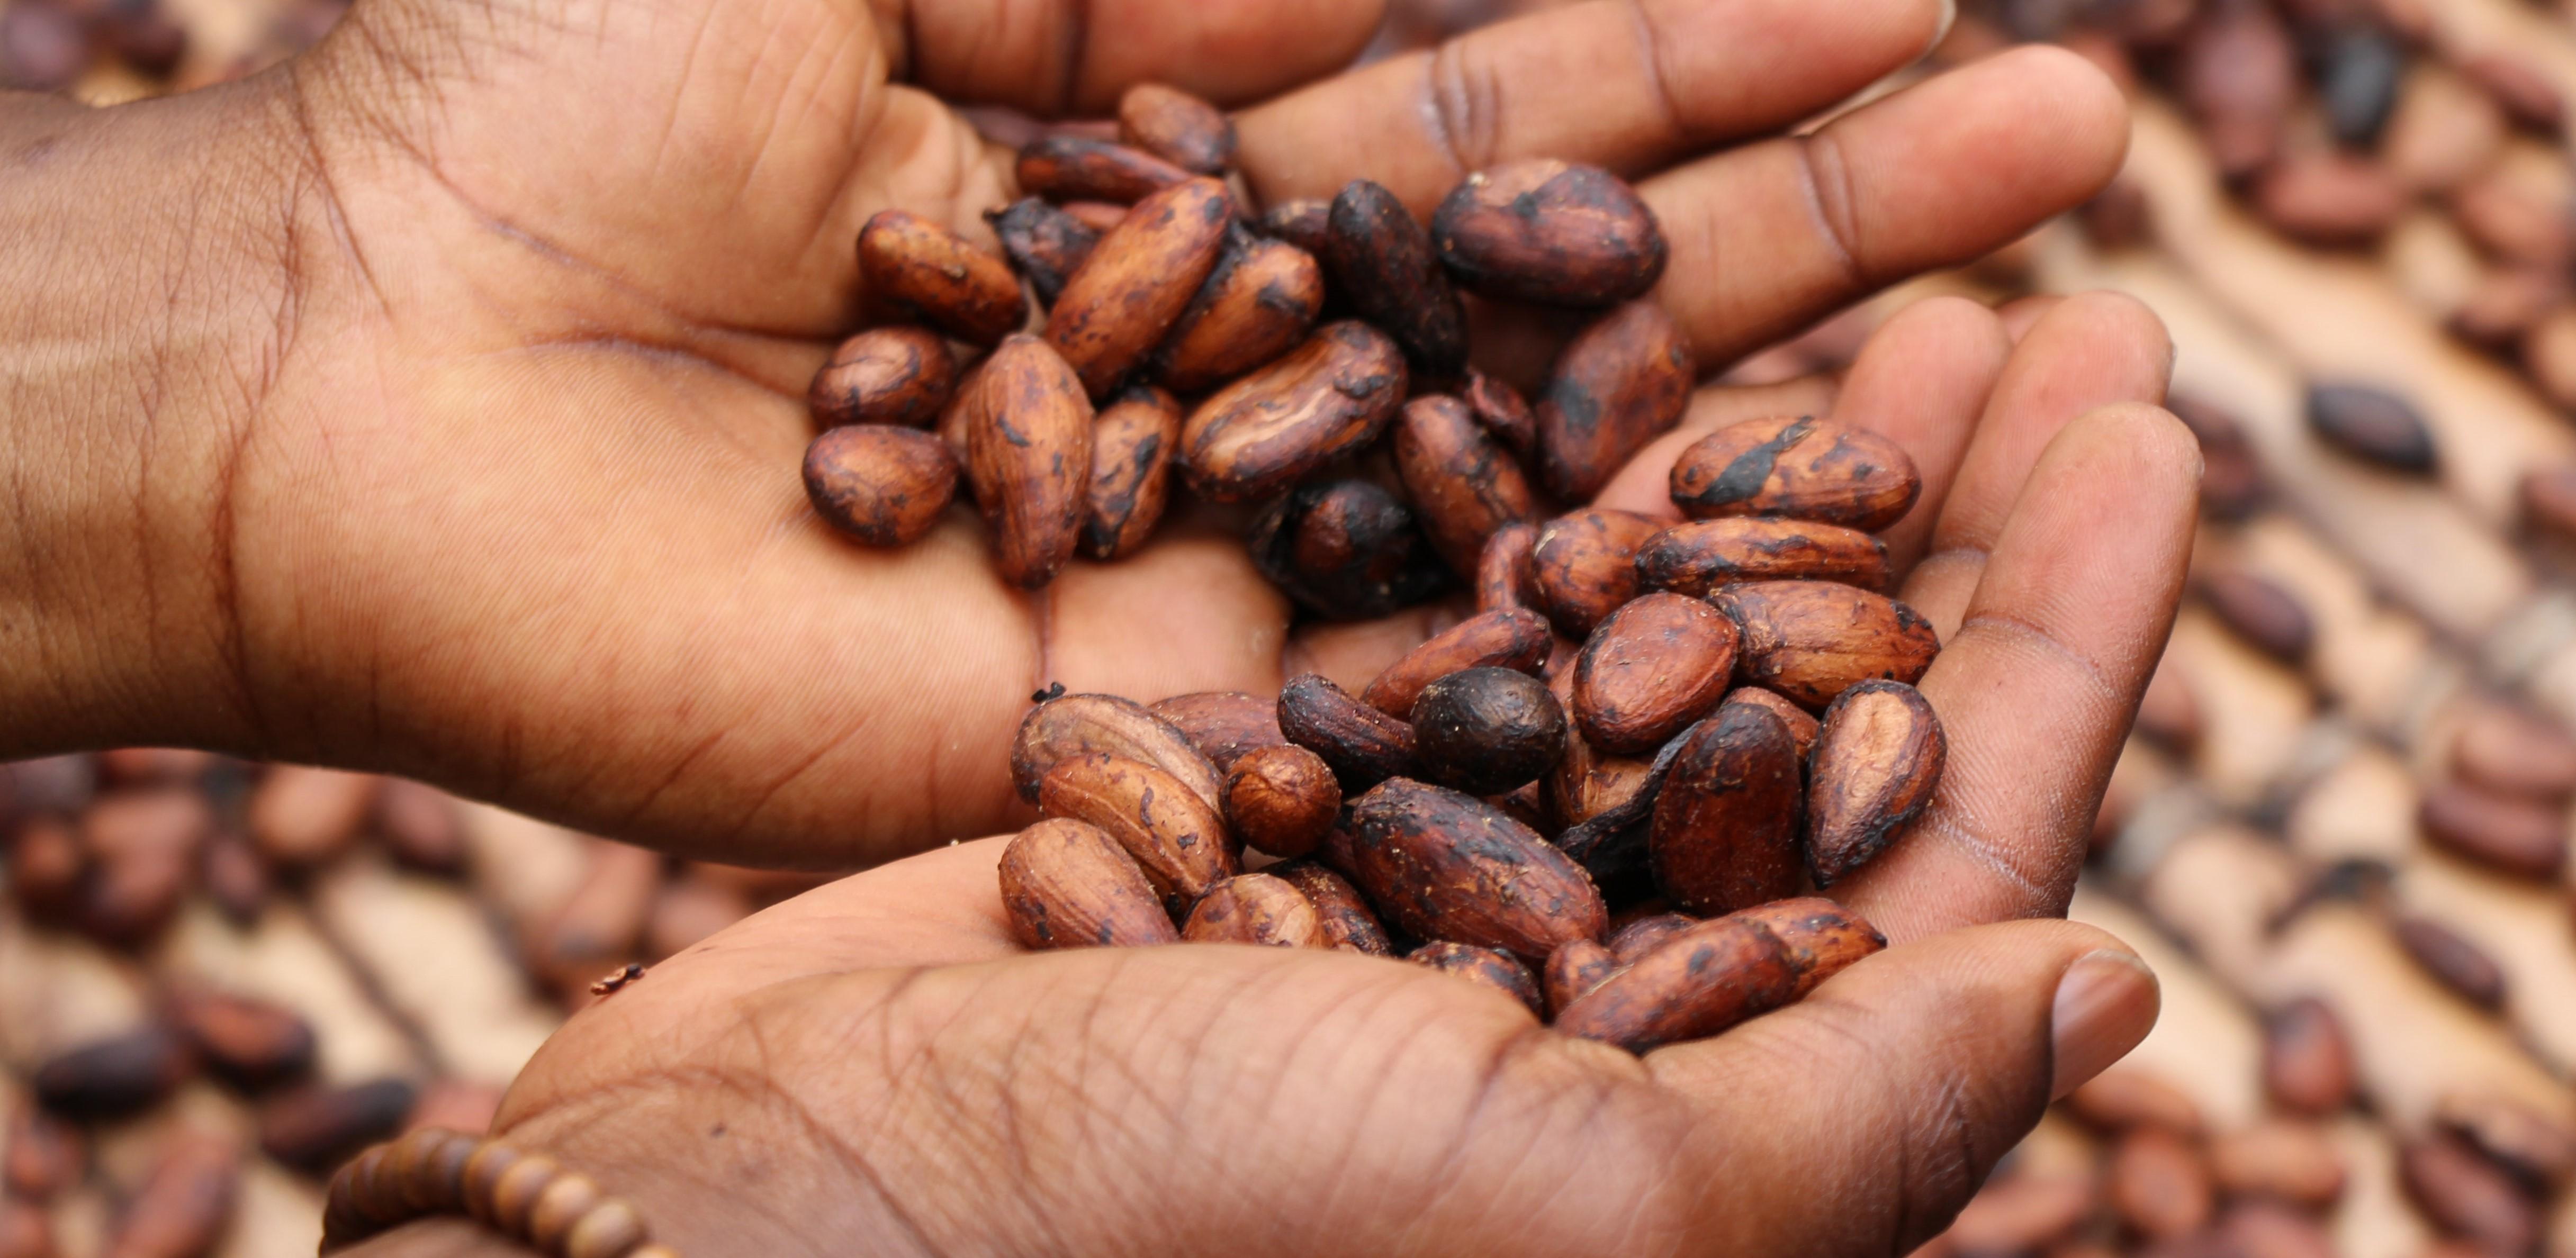 Hands holding coffee beans Photo by Etty Fidele Unsplash